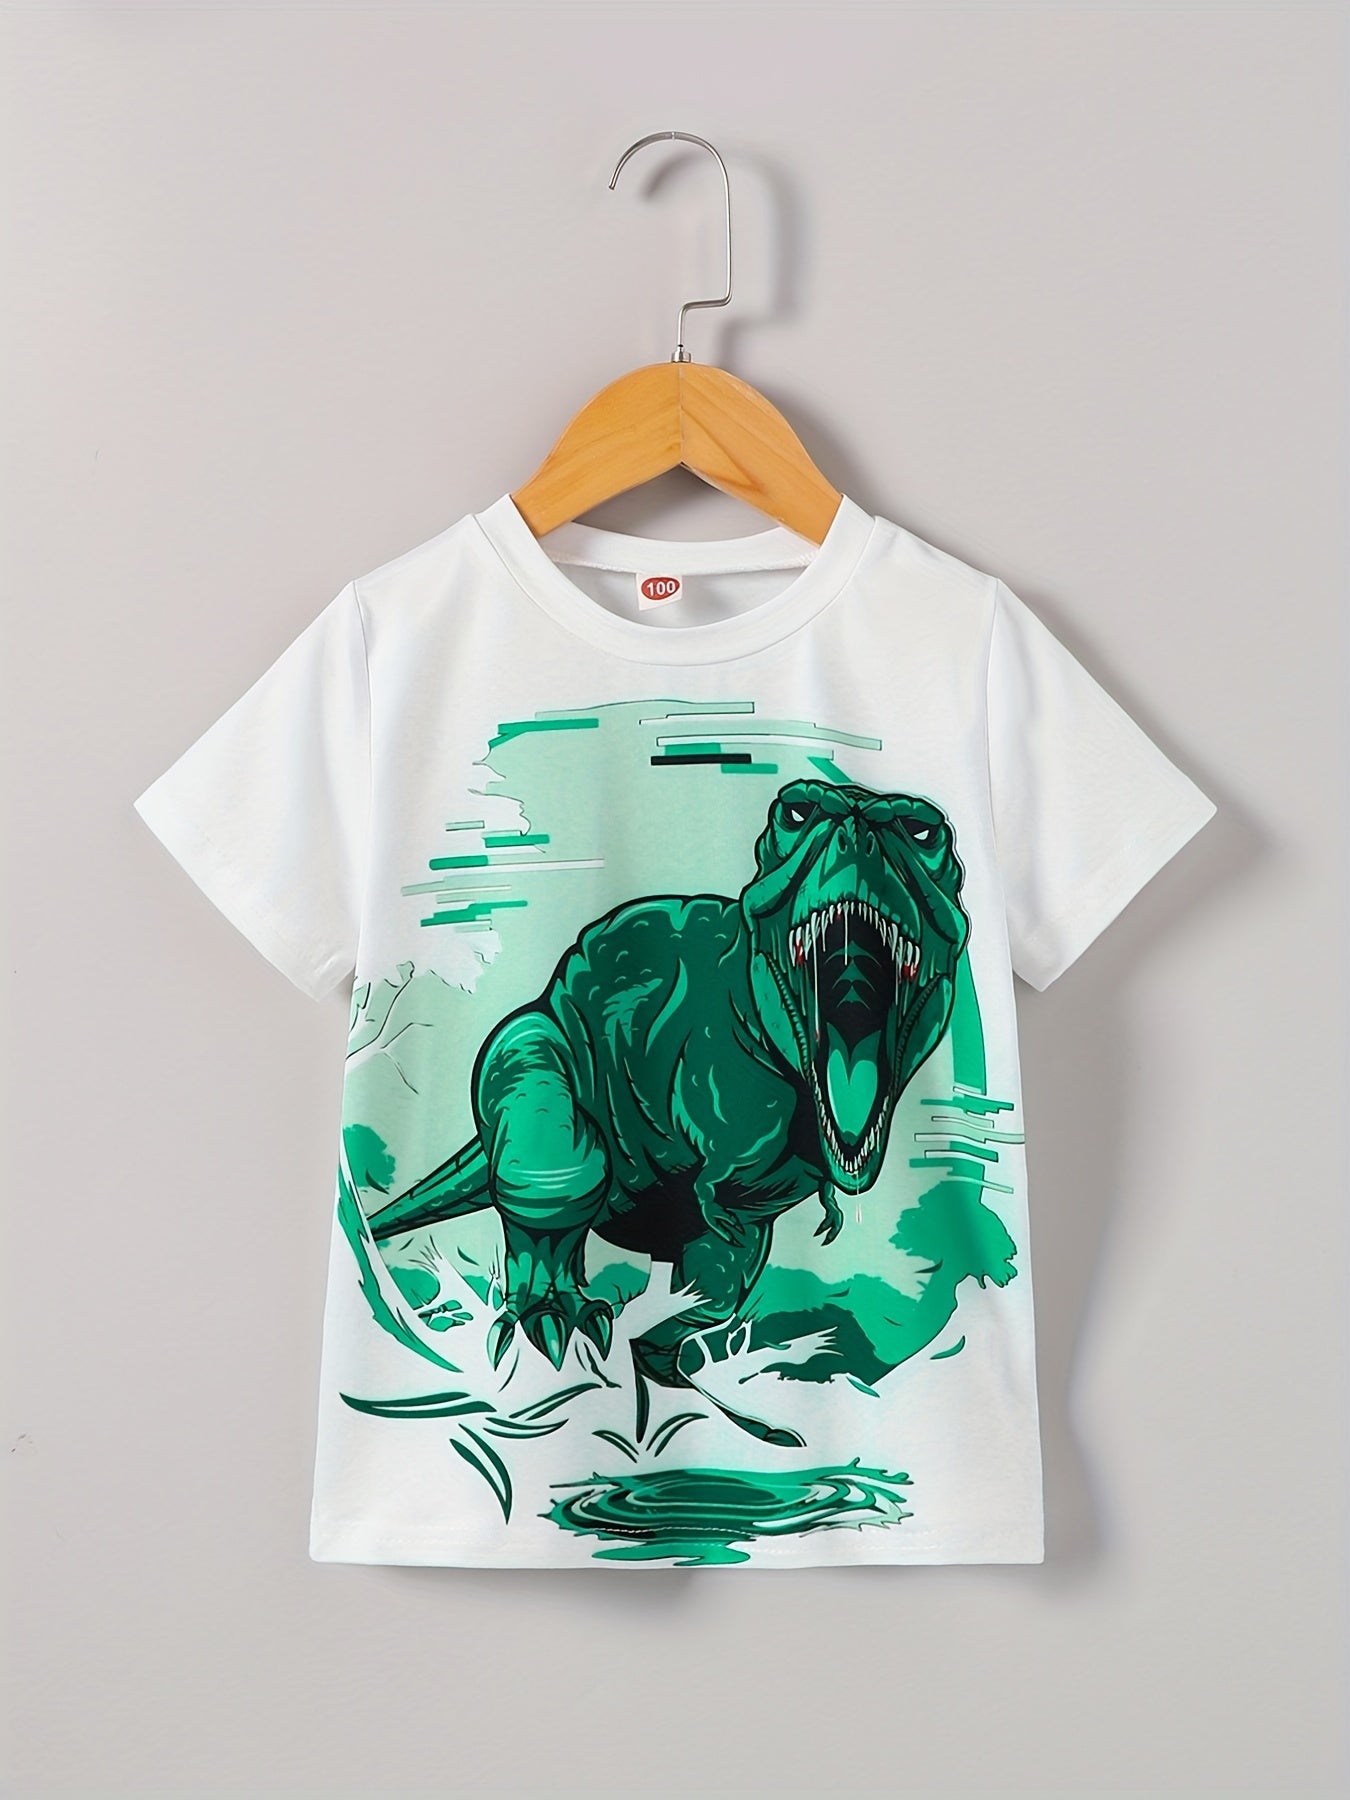 Boys Dinosaur Round Neck T-shirt Tee Top Casual Soft Comfortable For Summer Kids Clothes